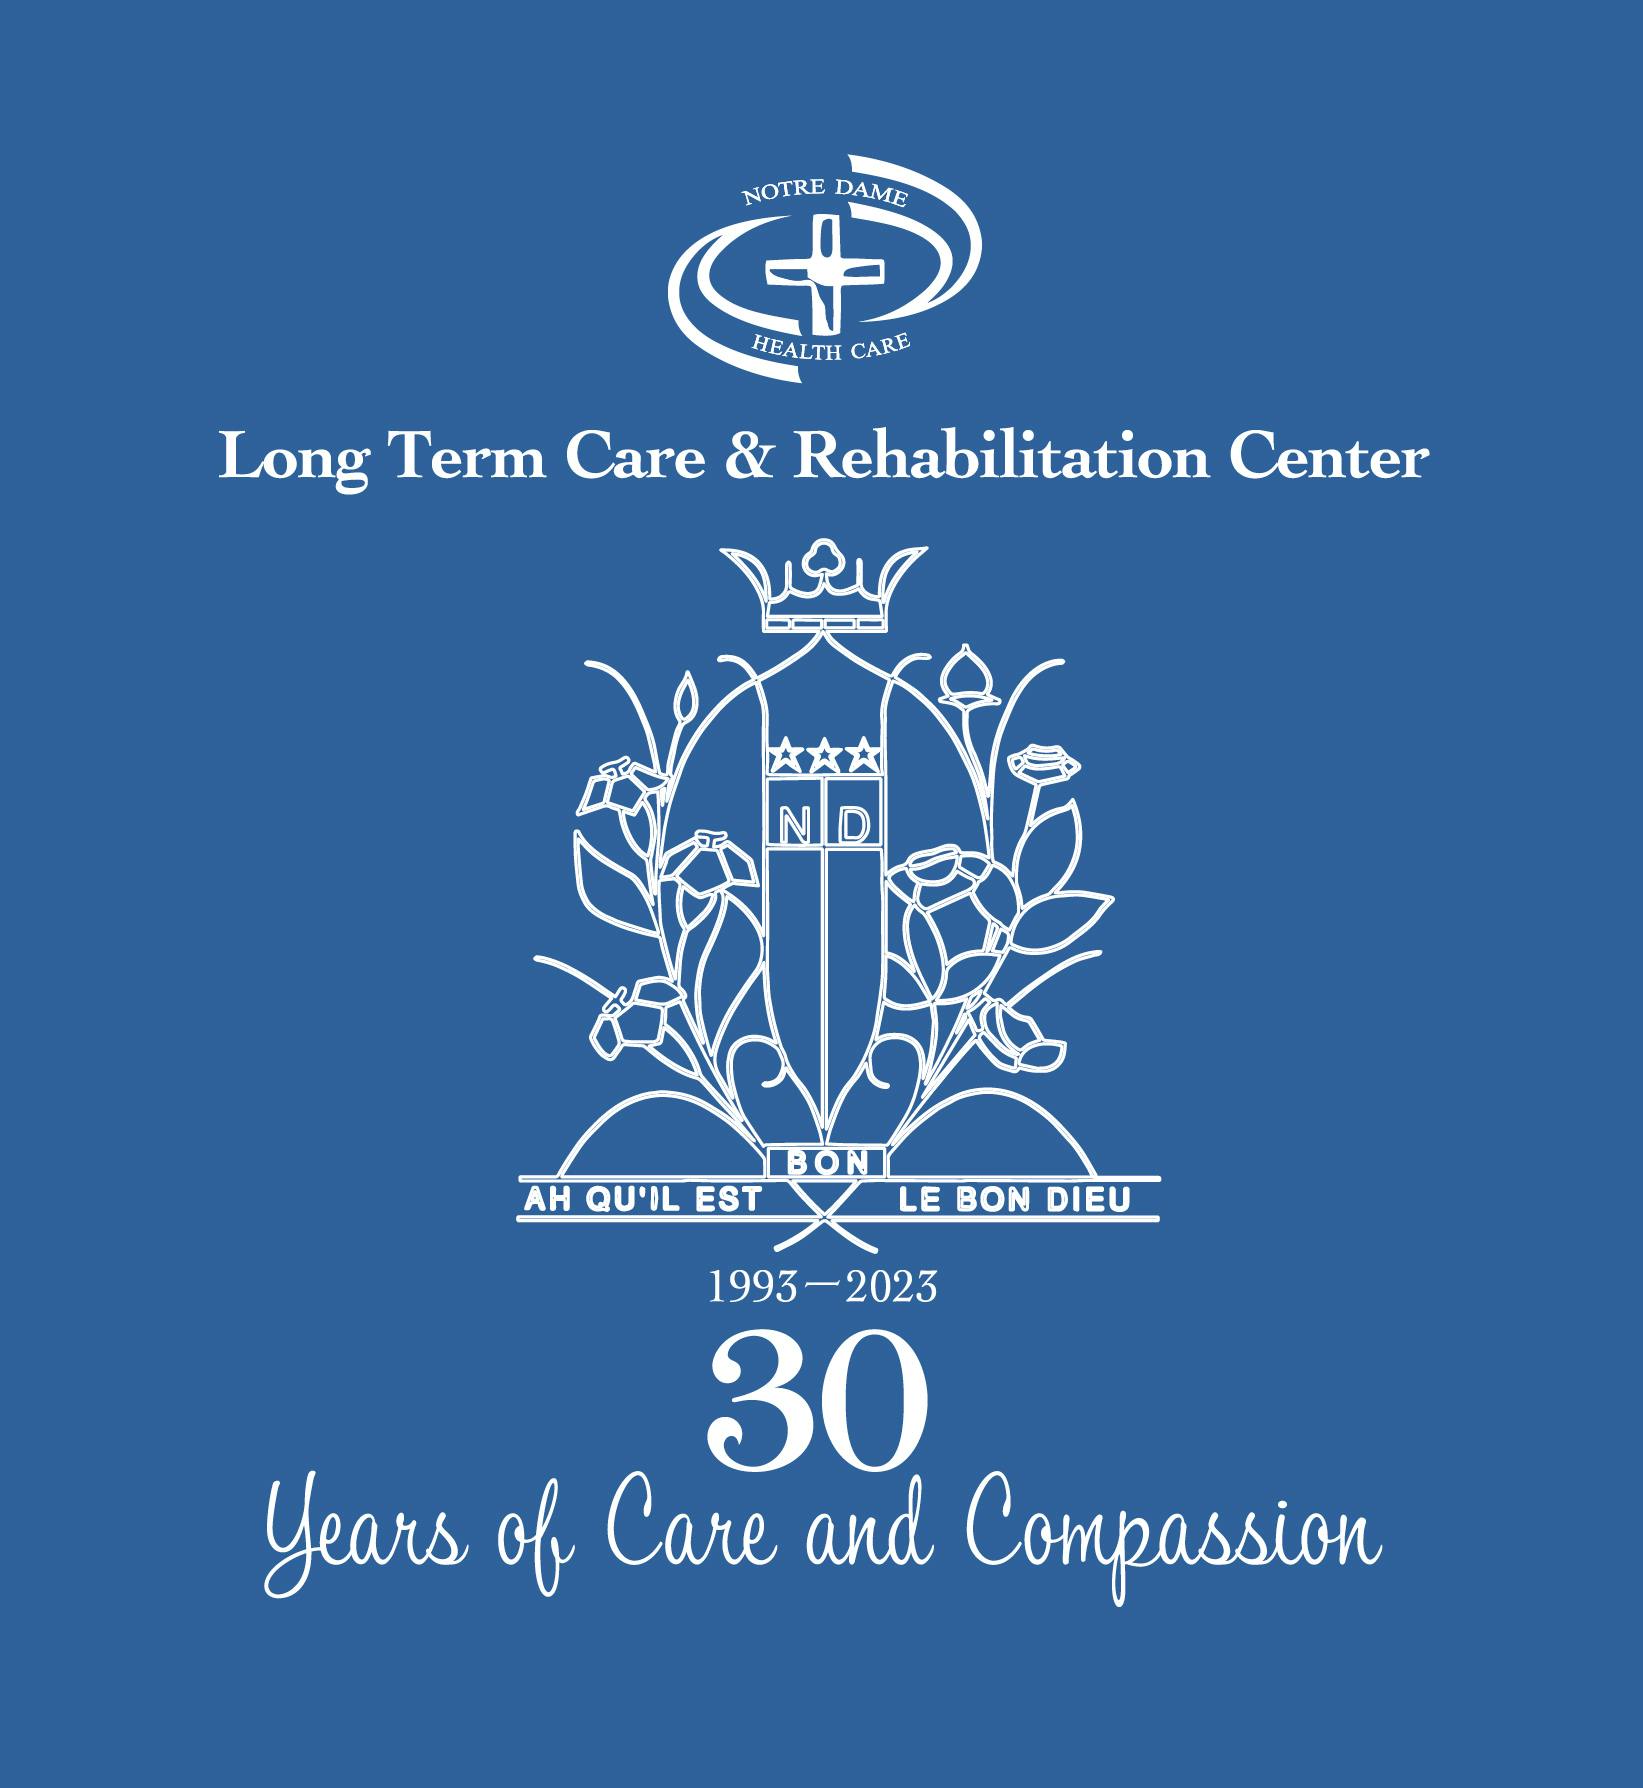 Long term care and rehabilitation center. 30 years of care and compassion.